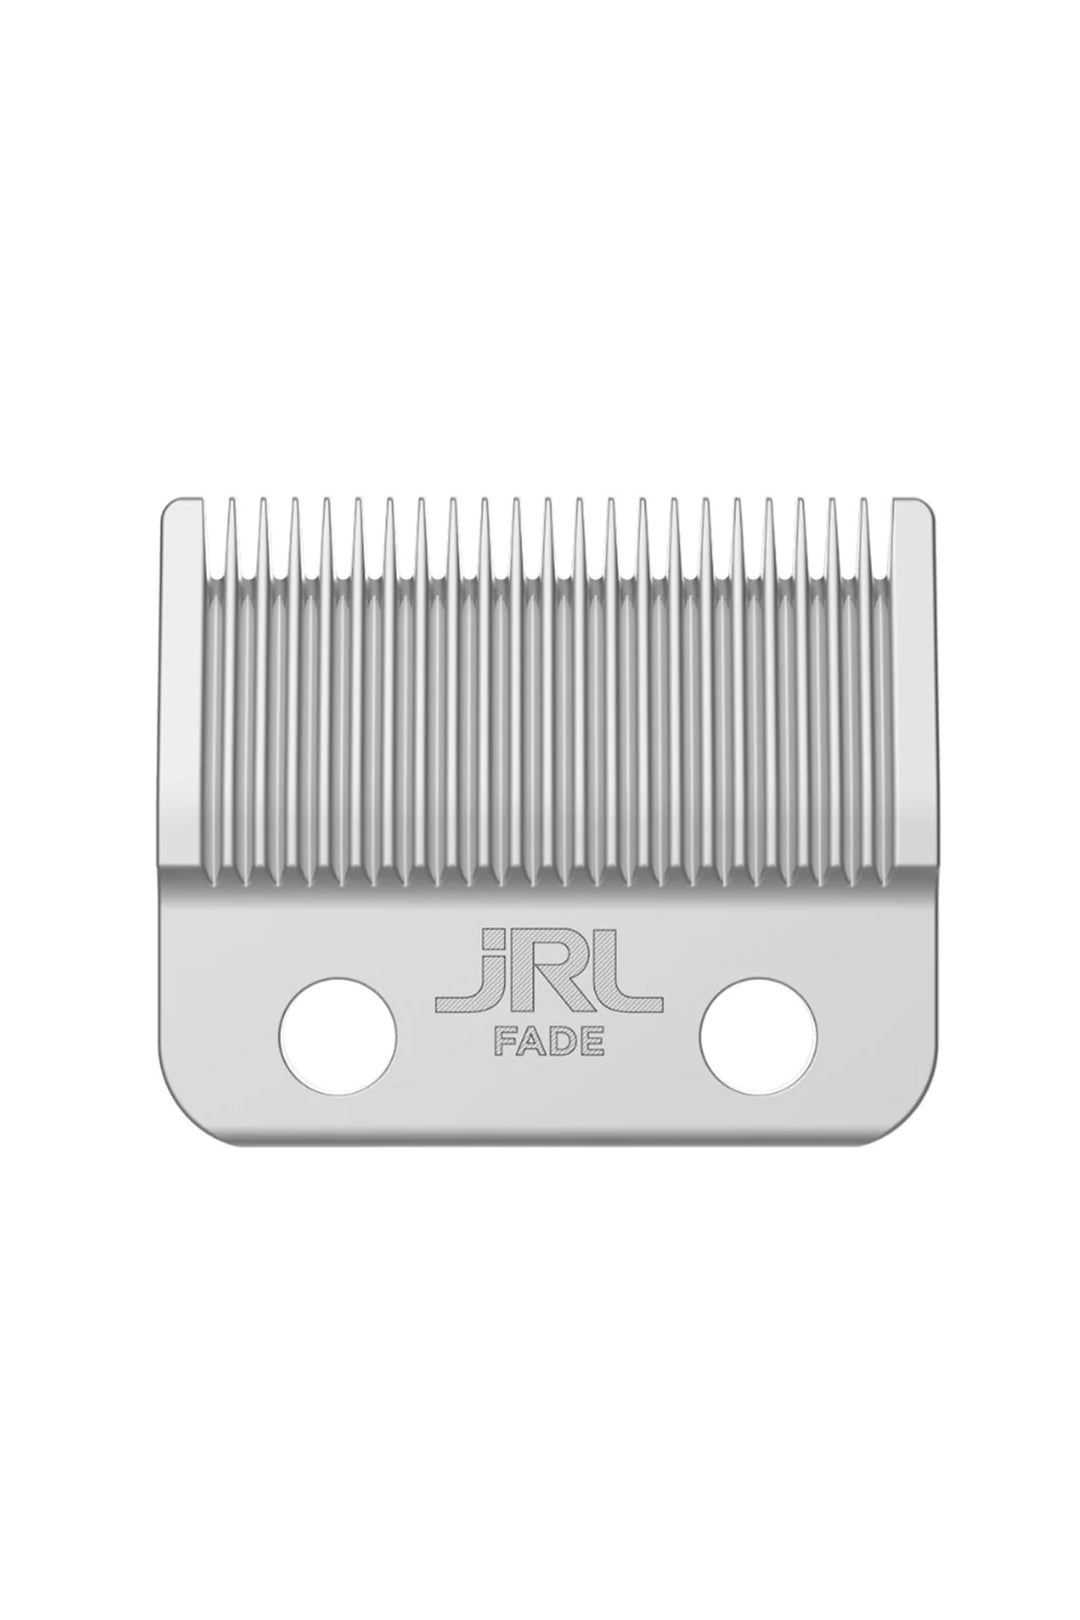 JRL FADE BLADE REPLACEMENT SILVER